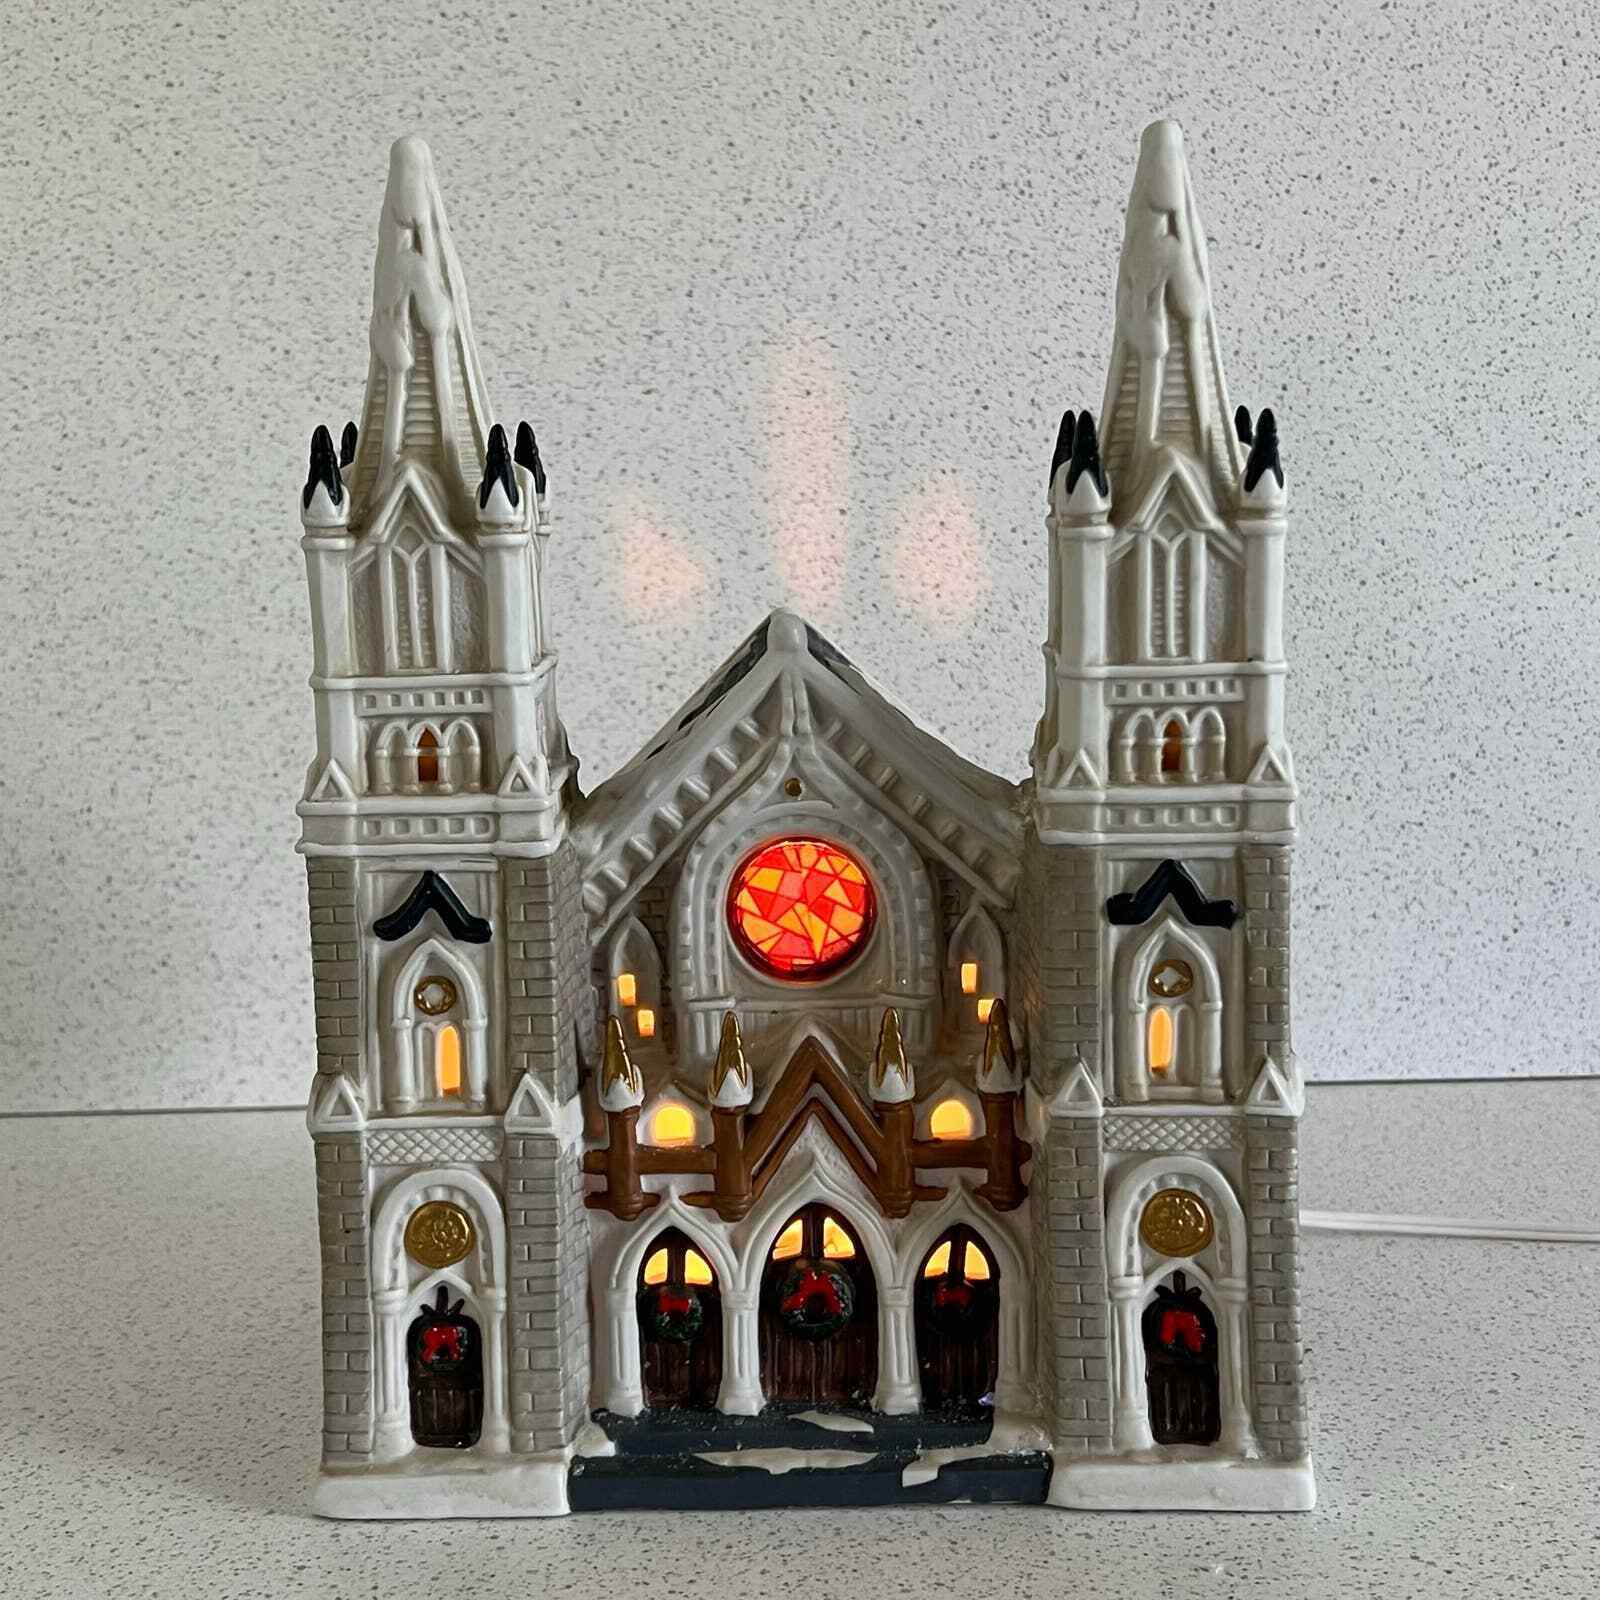 Mervyn's Village Square Church Two Steeples 1996 Lighted Christmas Building